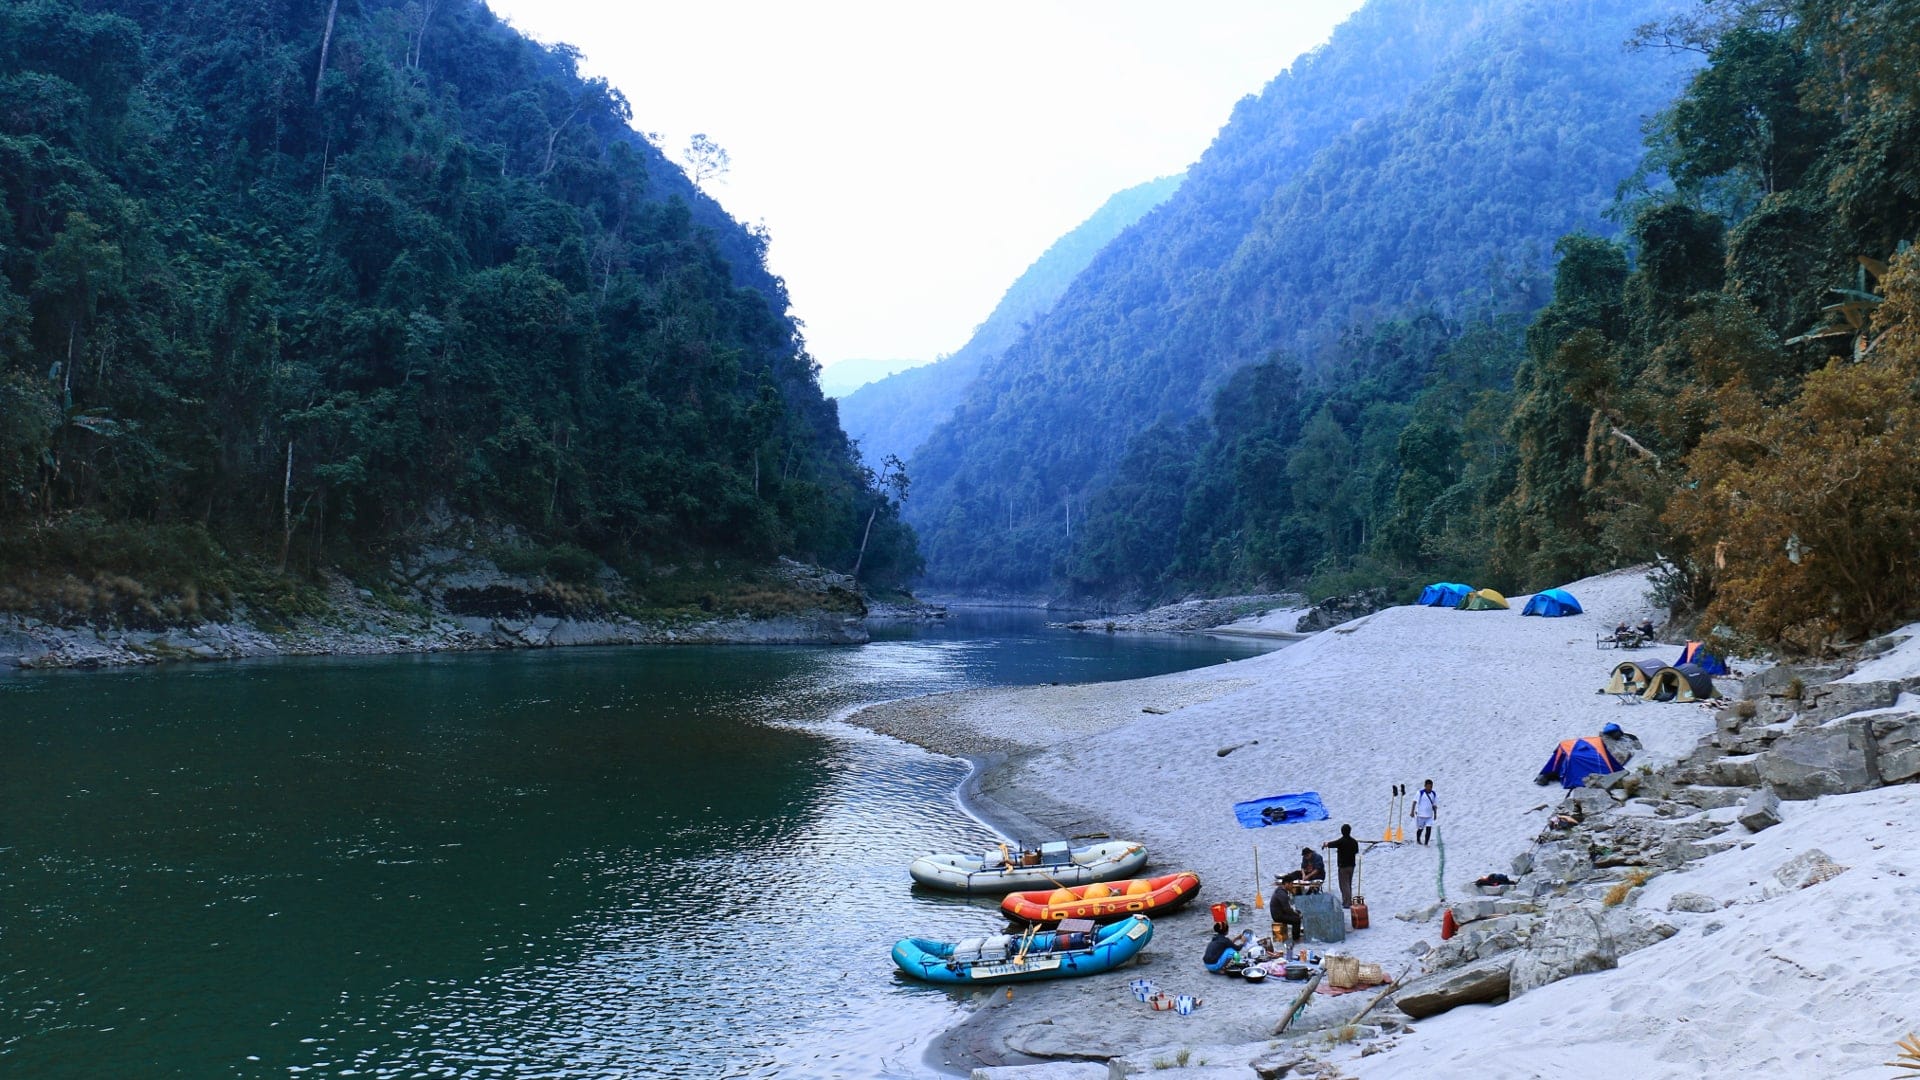 Rafting Tours & Fishing Expedition